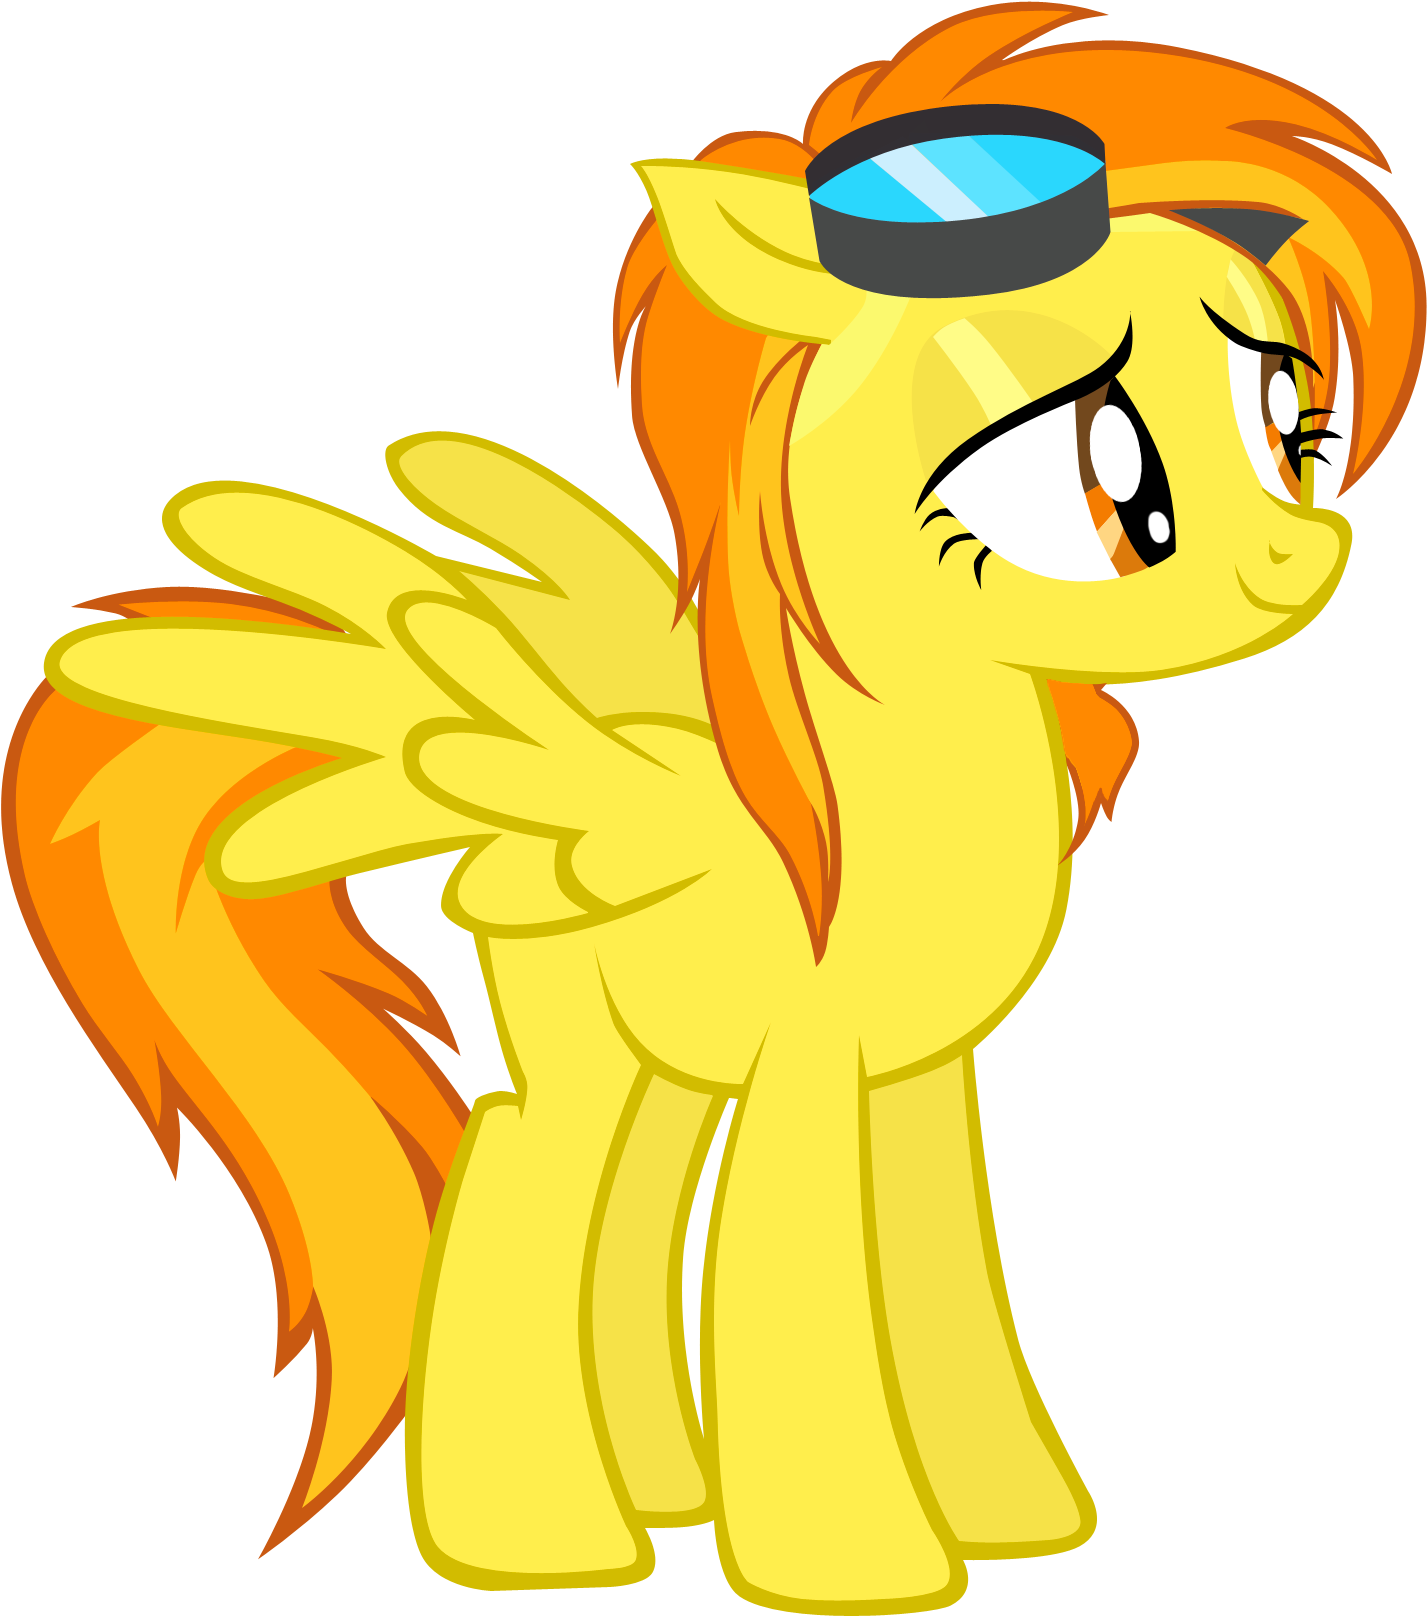 Spitfire Brushed Hair Goggles By Sierraex Spitfire - Spitfire Brushed Hair Goggles By Sierraex Spitfire (1591x2000)